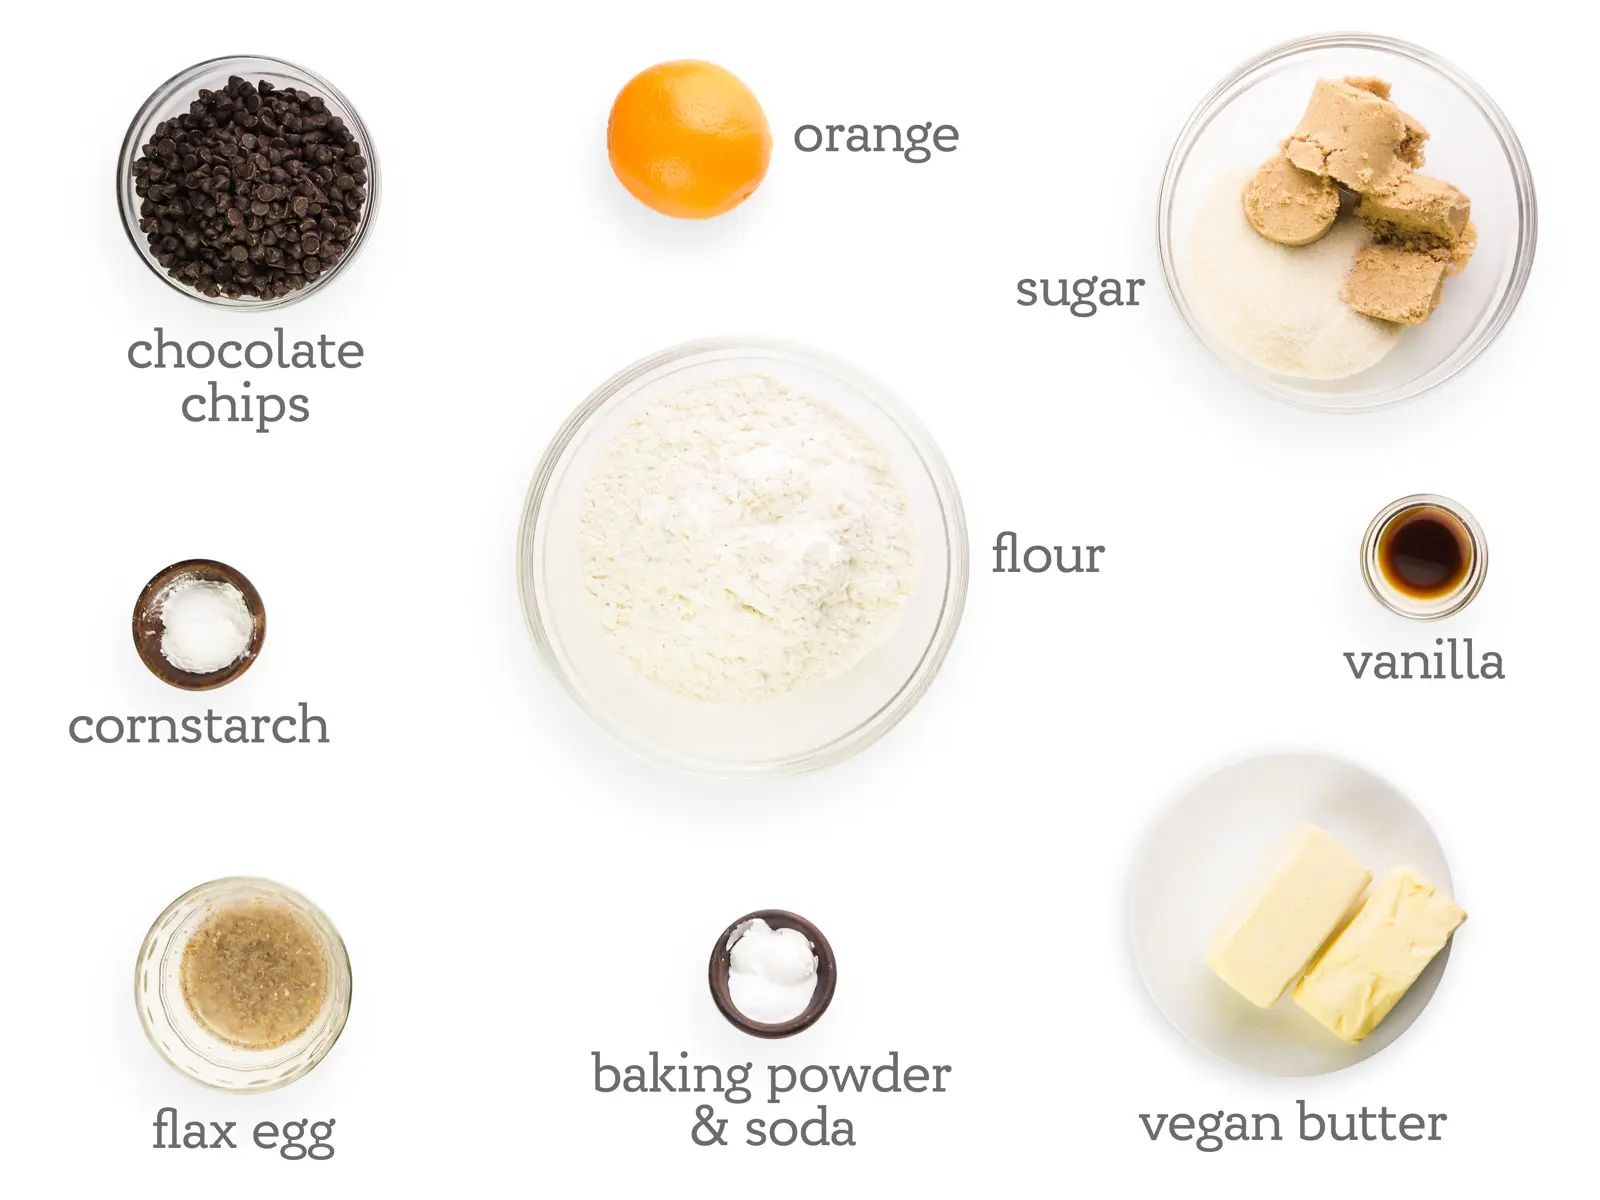 Ingredients are on a white table. The labels read, "orange, sugar, vanilla, vegan butter, baking powder + soda, flax egg, cornstarch, chocolate chips."